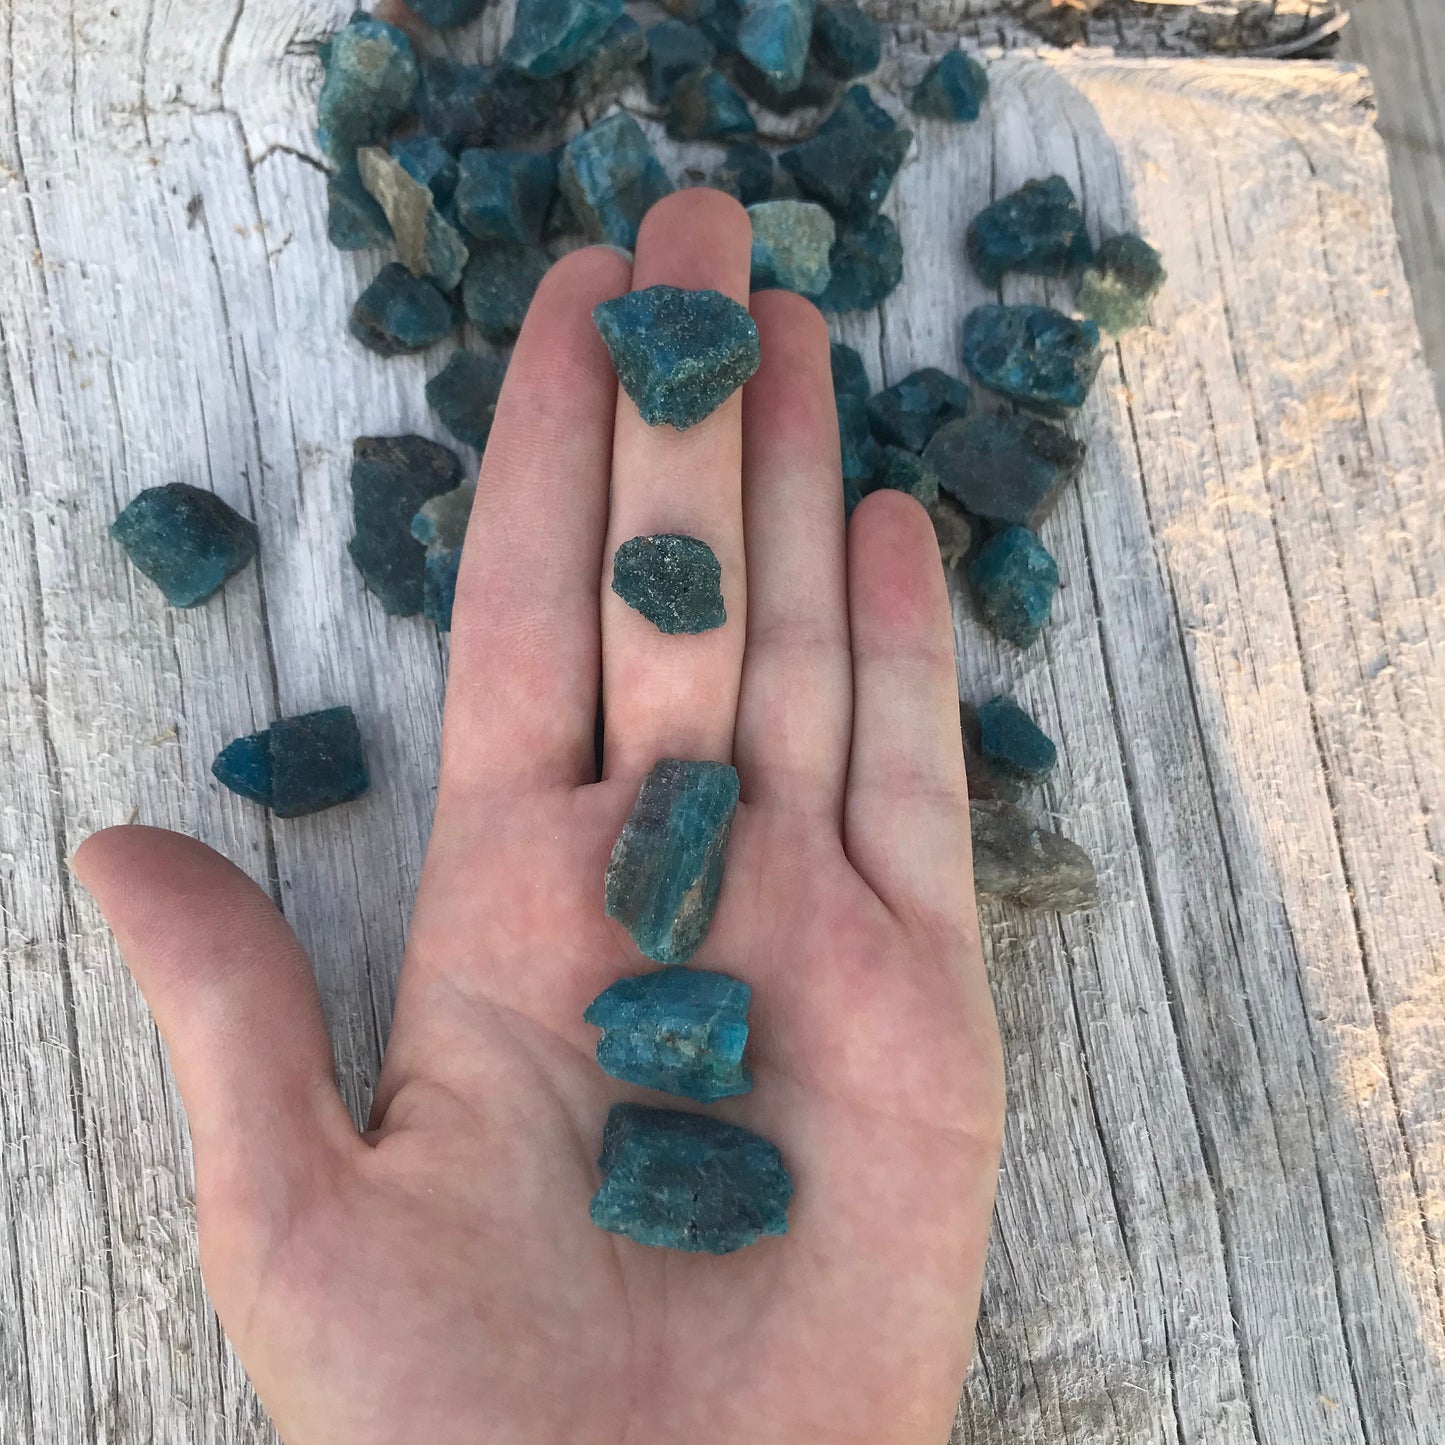 Raw Blue Apatite, One stone (1/2 to 1" long), Rough Teal Blue Healing Crystal 0157